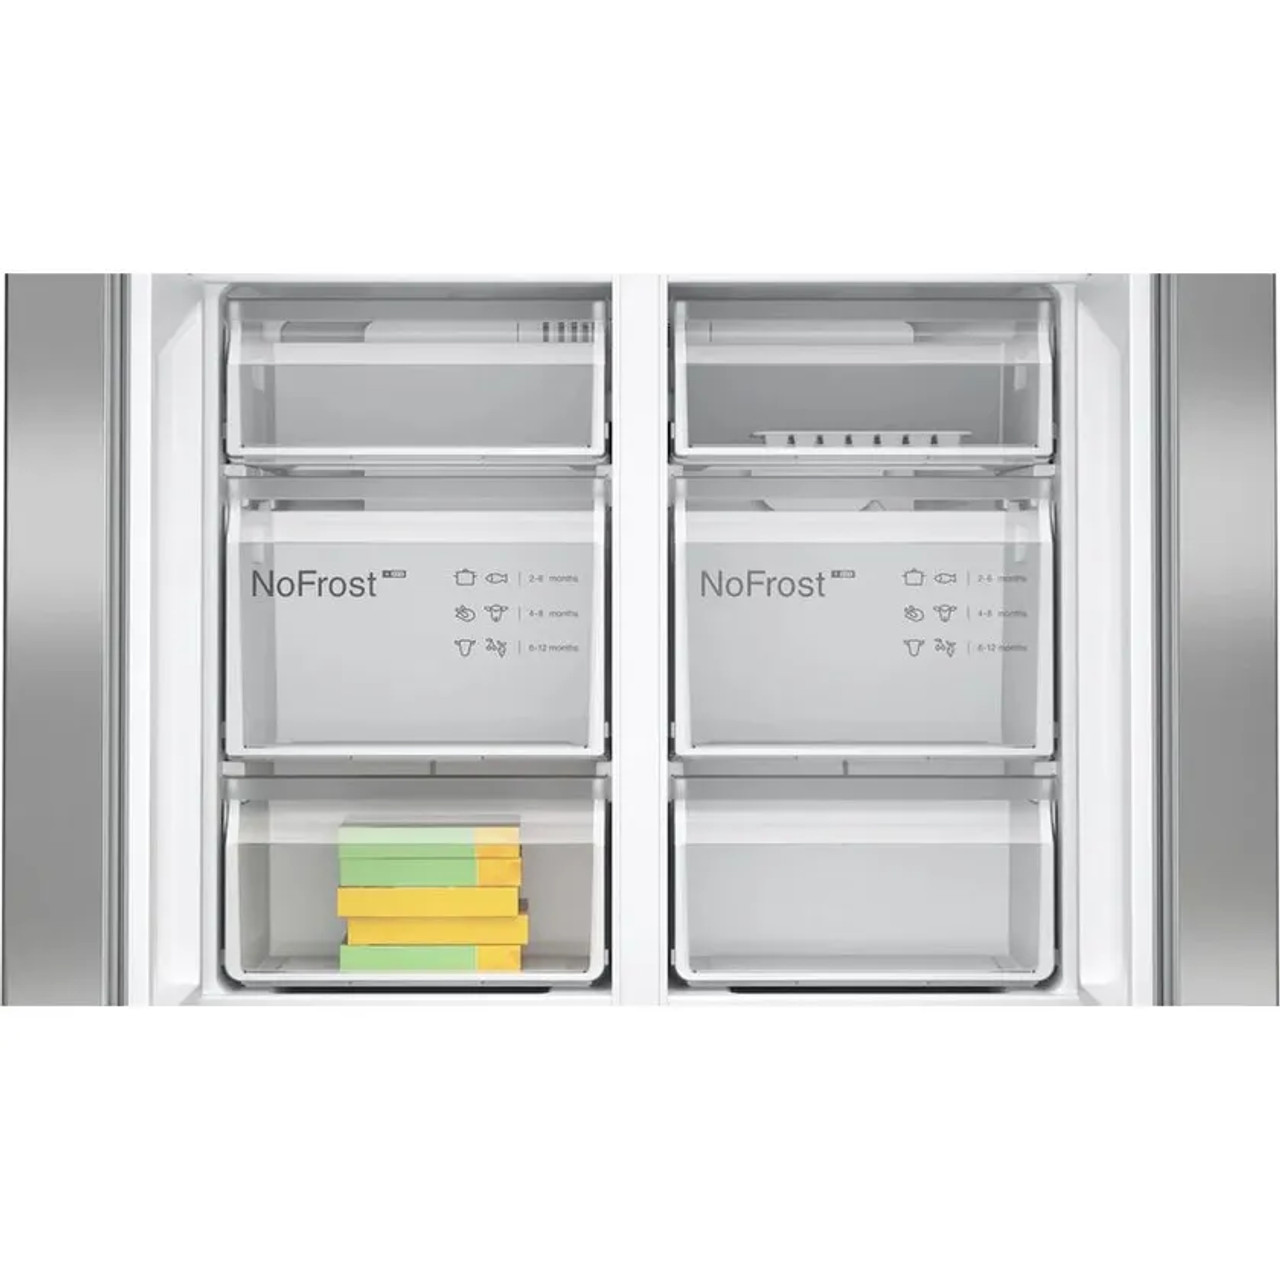 KFN96APEAA - 605L French Quad Door Refrigerator - Stainless Steel